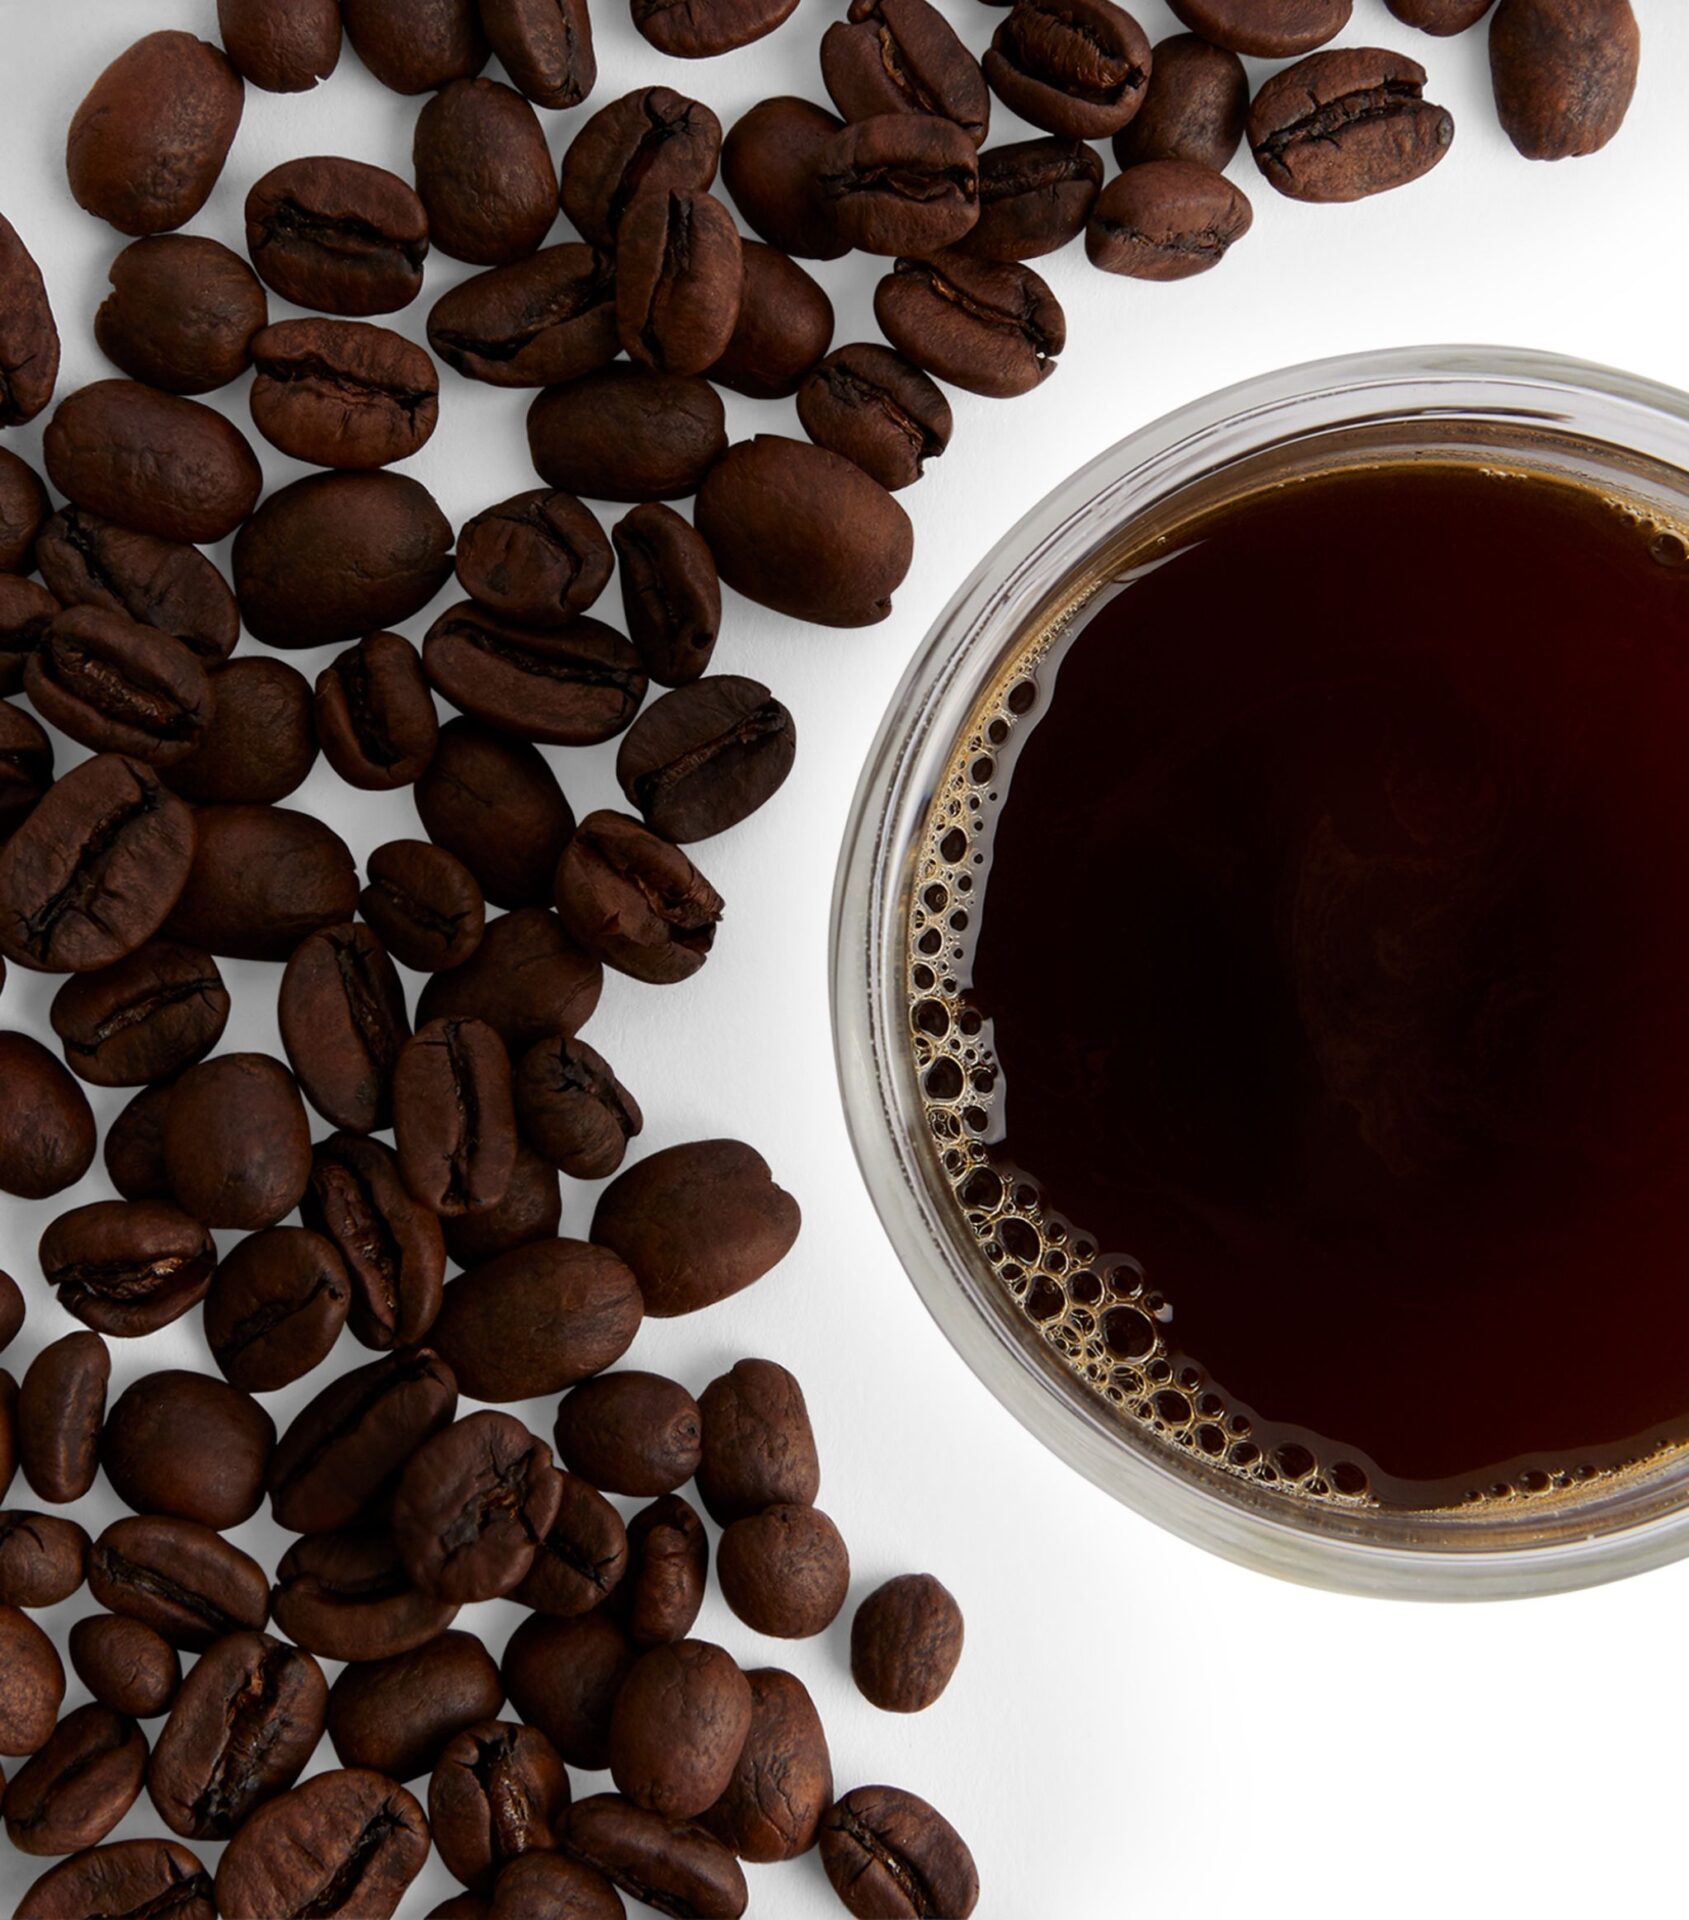 Did you know that this special type of coffee is made from bird droppings?